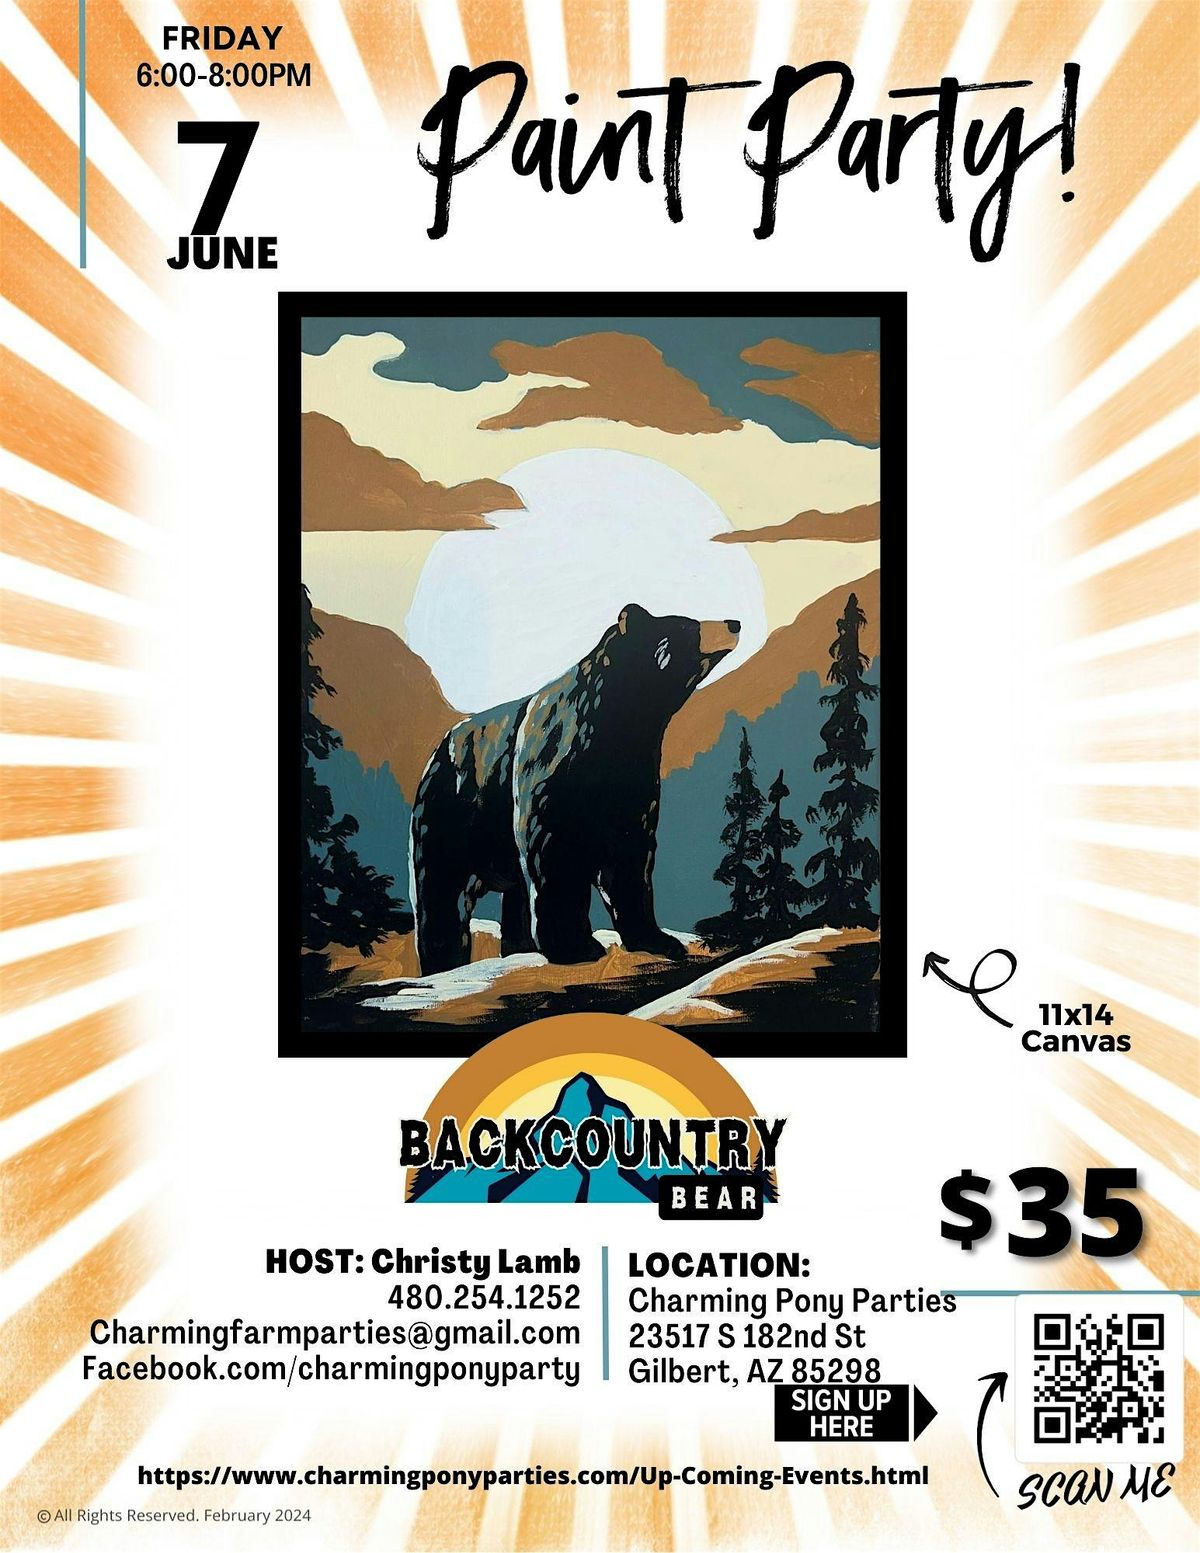 Back Country Paint Party